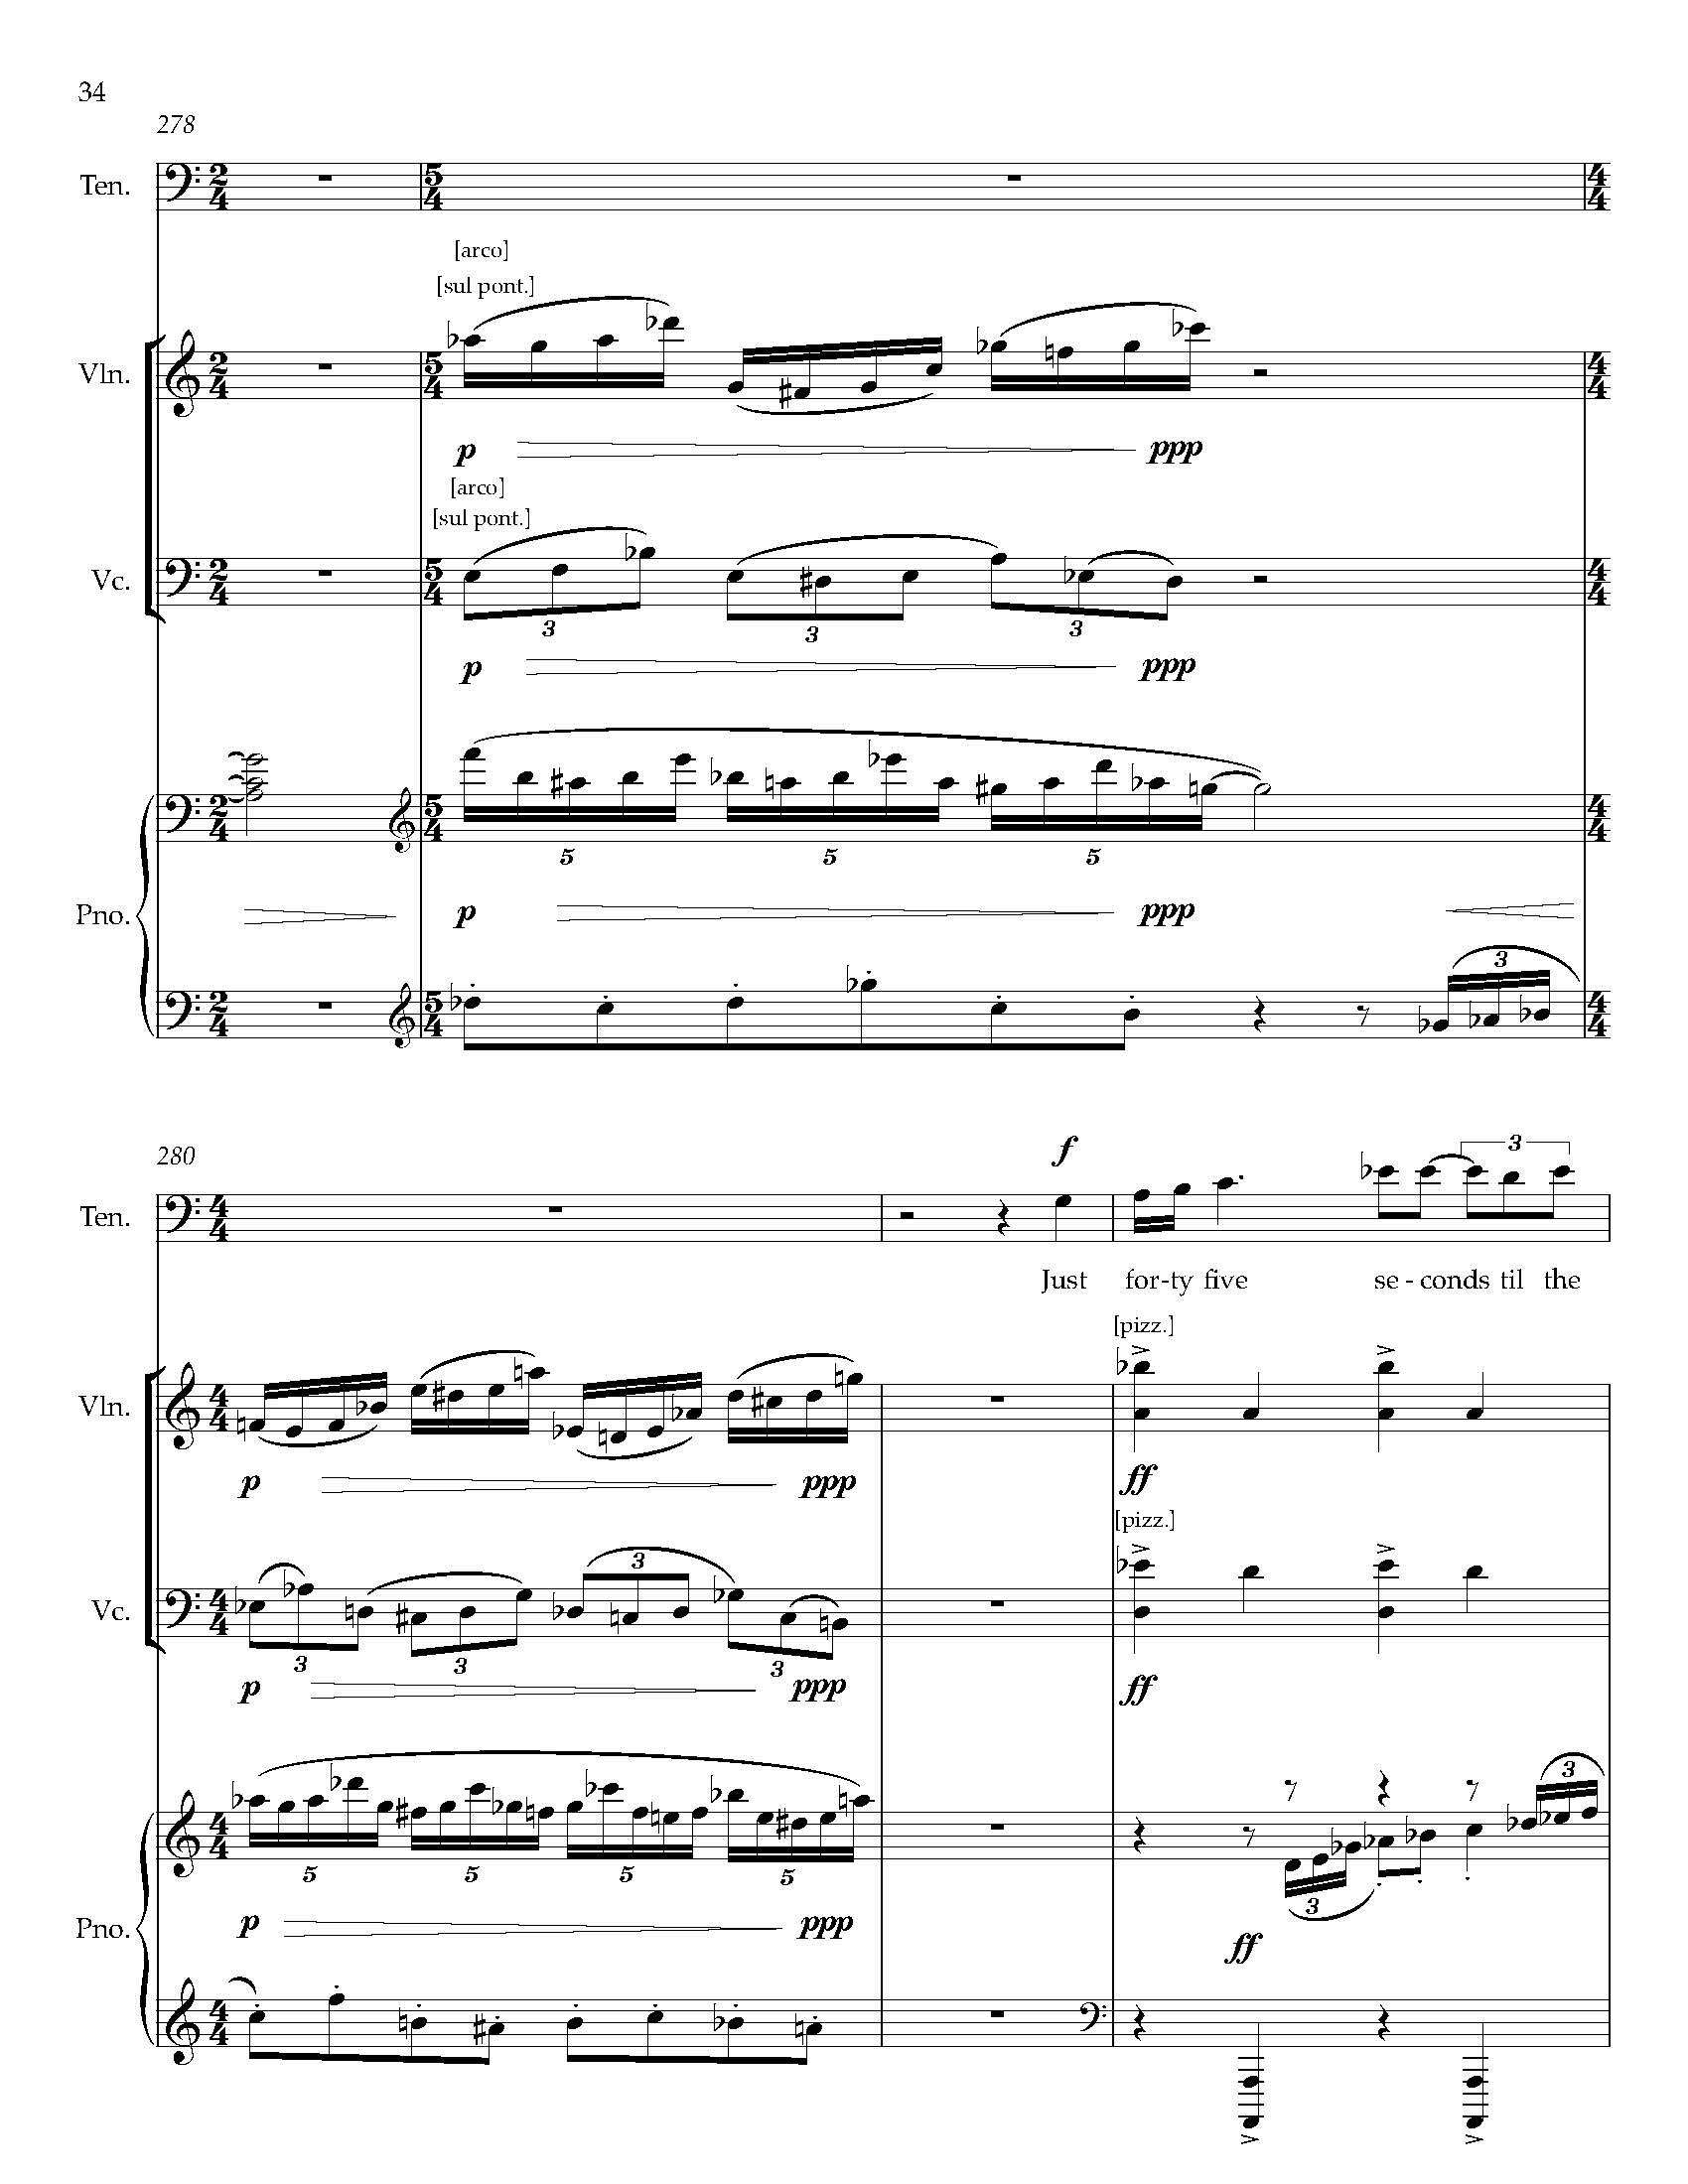 Gursky Songs - Complete Score_Page_42.jpg